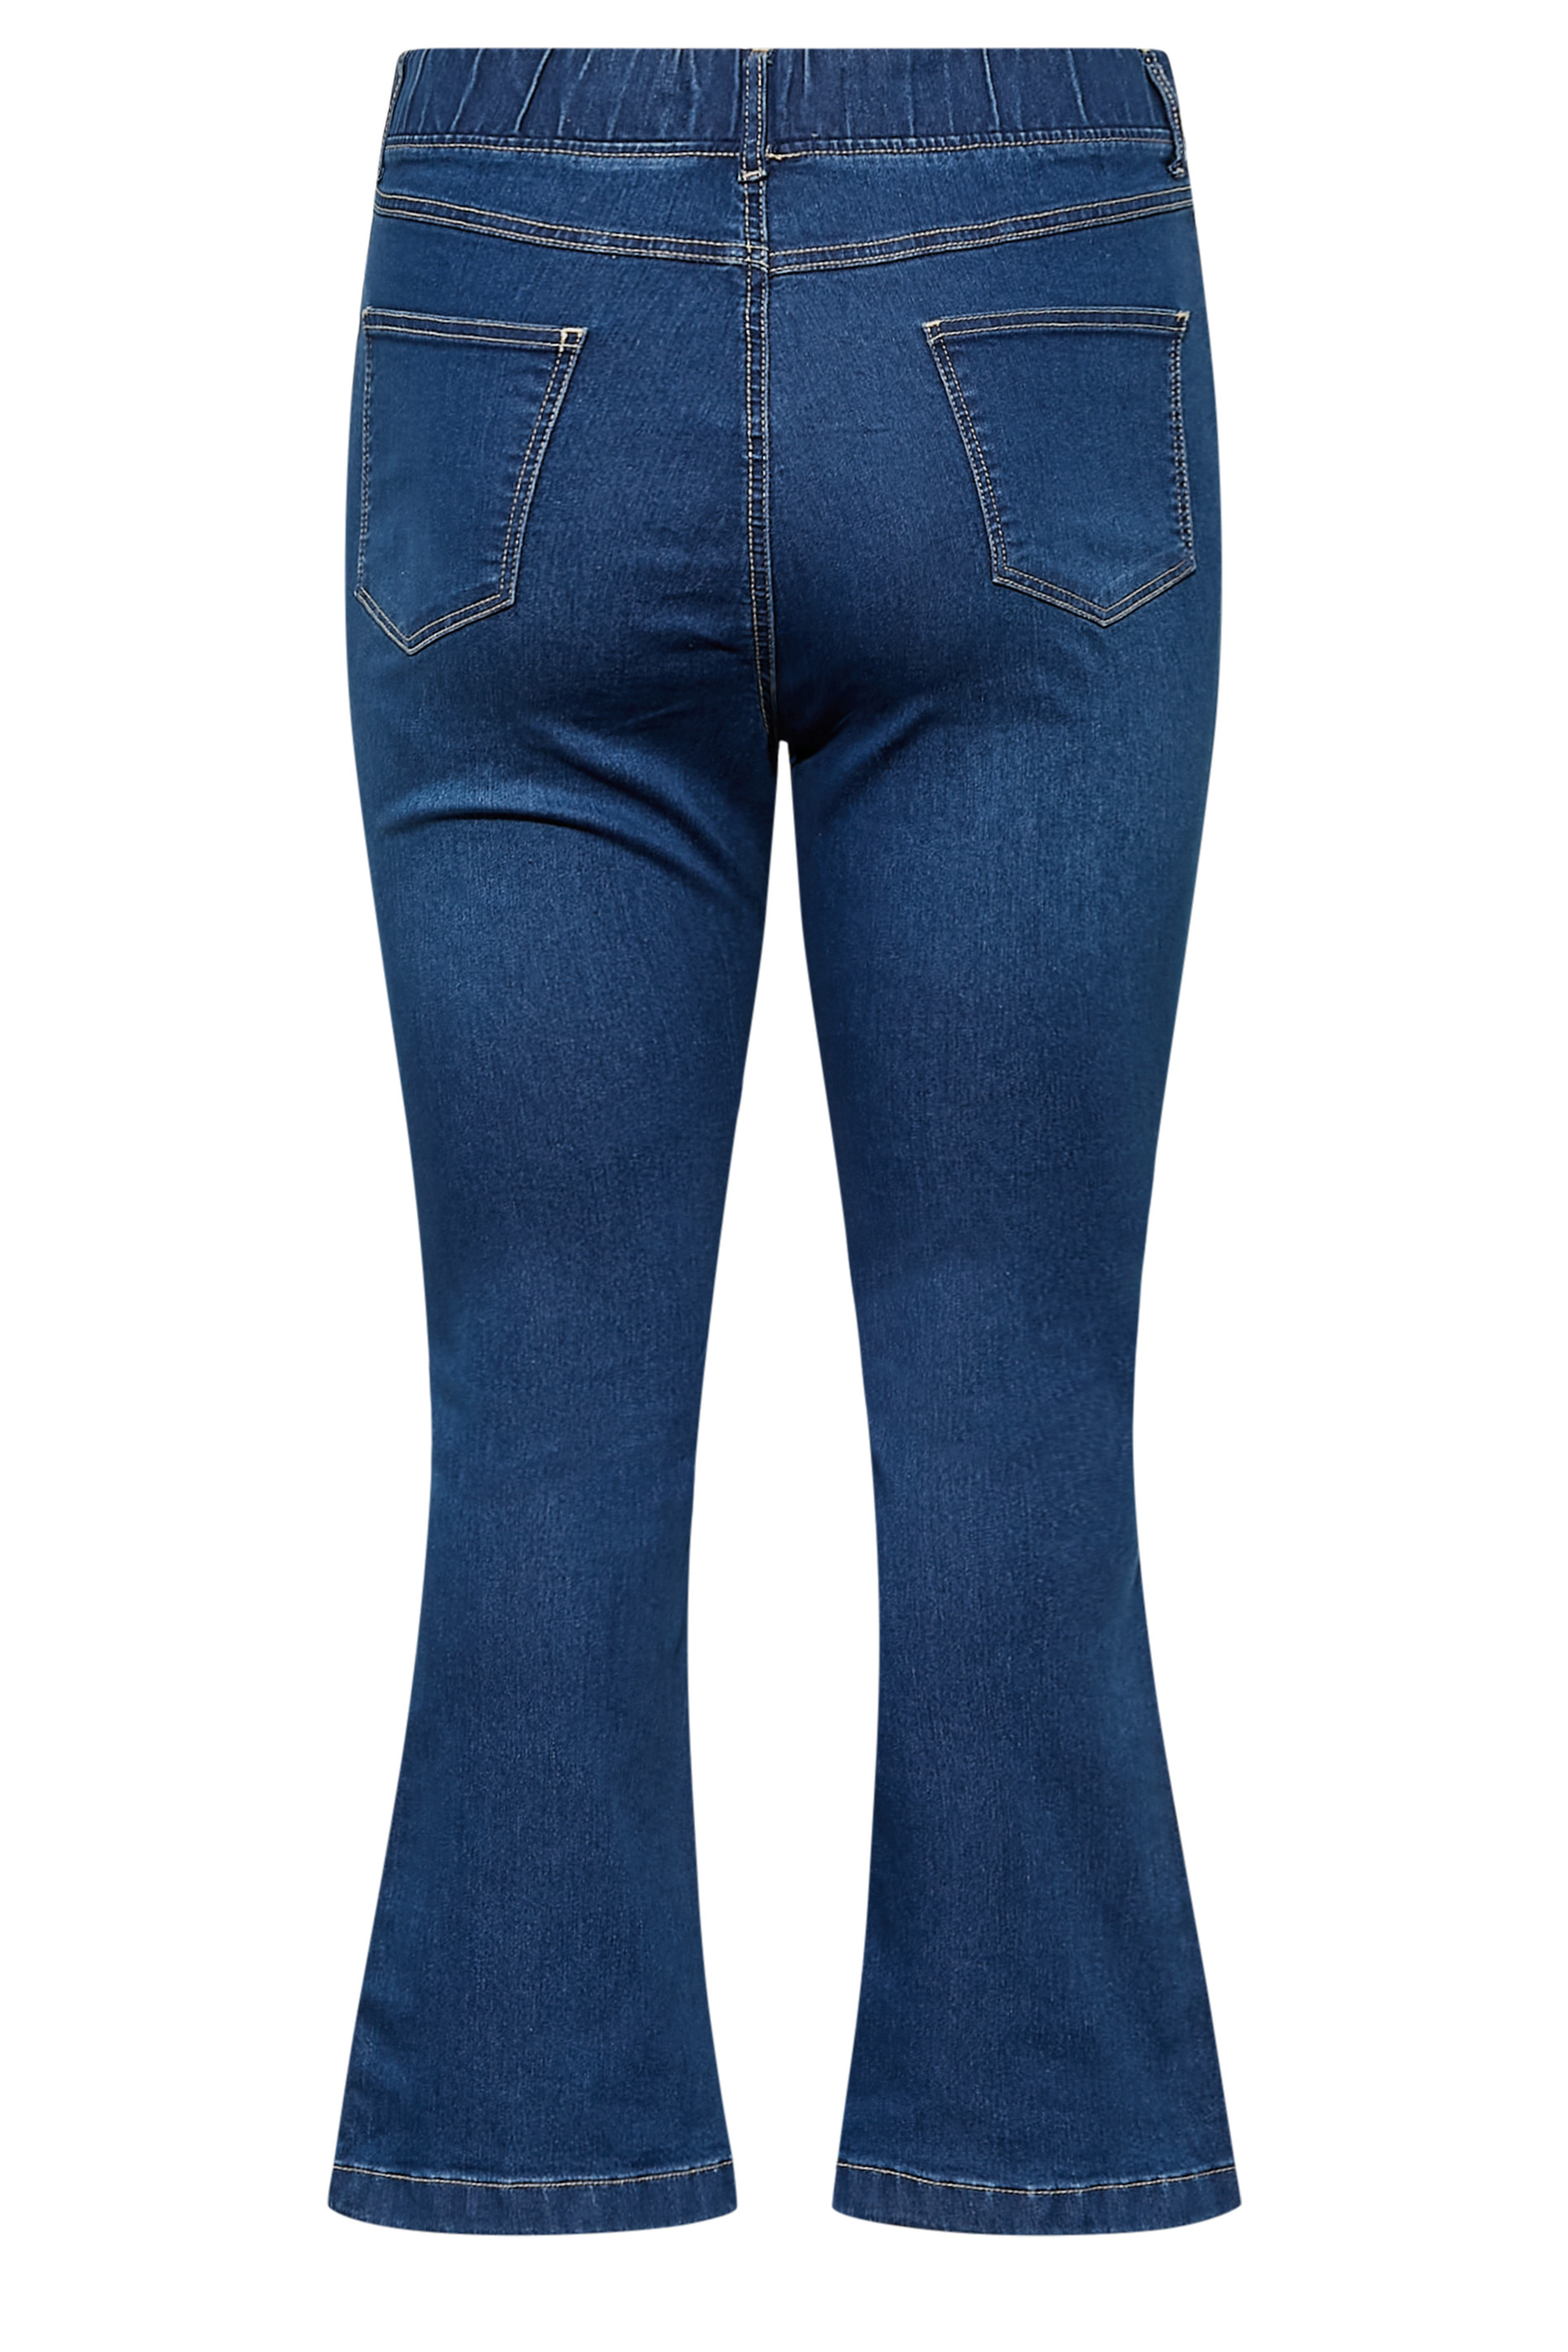 Plus Size Blue Pull-On HANNAH Bootcut Jeggings